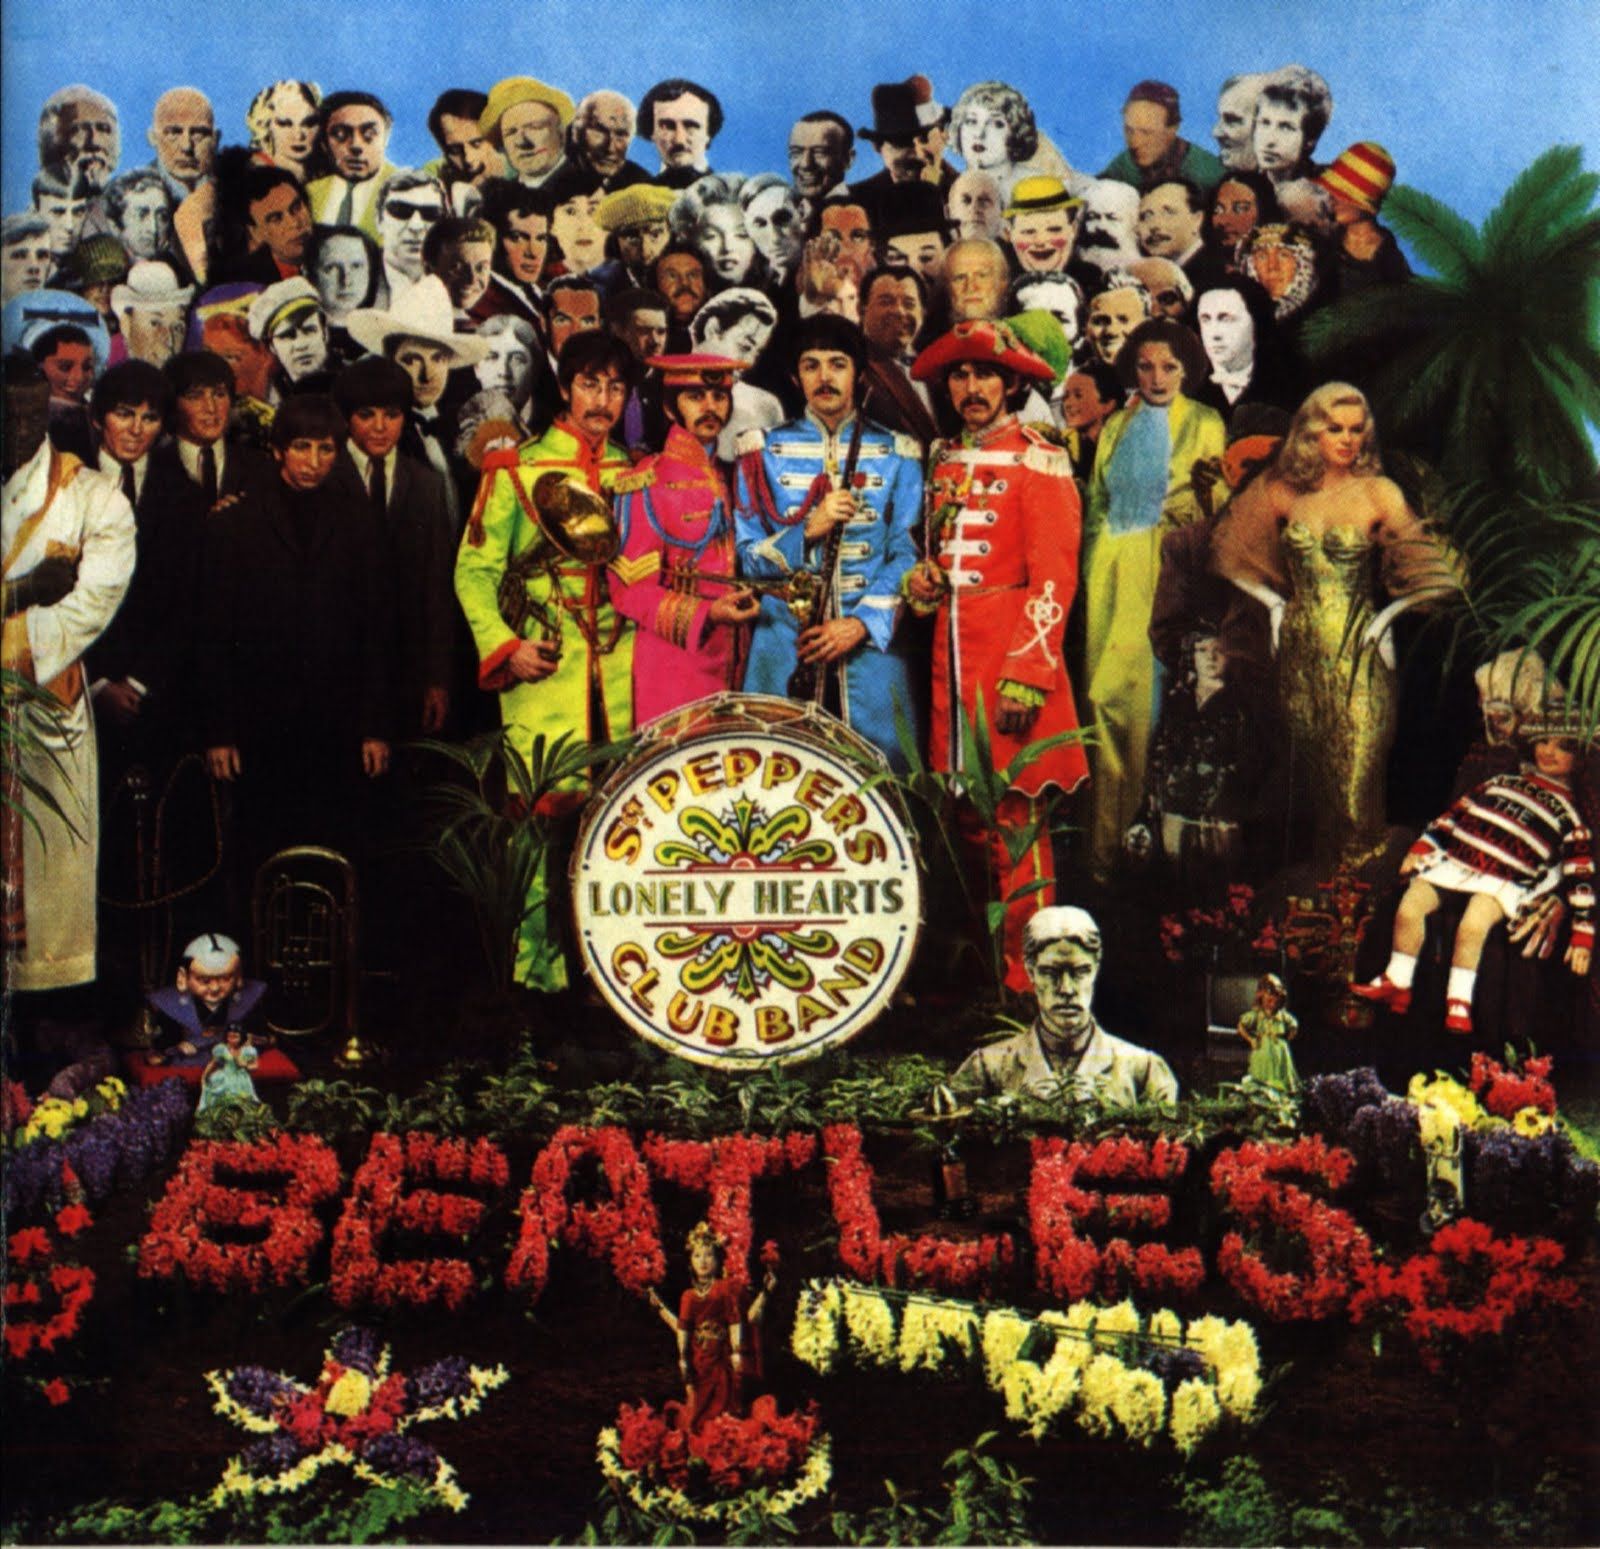 Ranking The Beatles: Sgt. Pepper’s Lonely Hearts Club Band (Beatles Week 2016 Day 7)